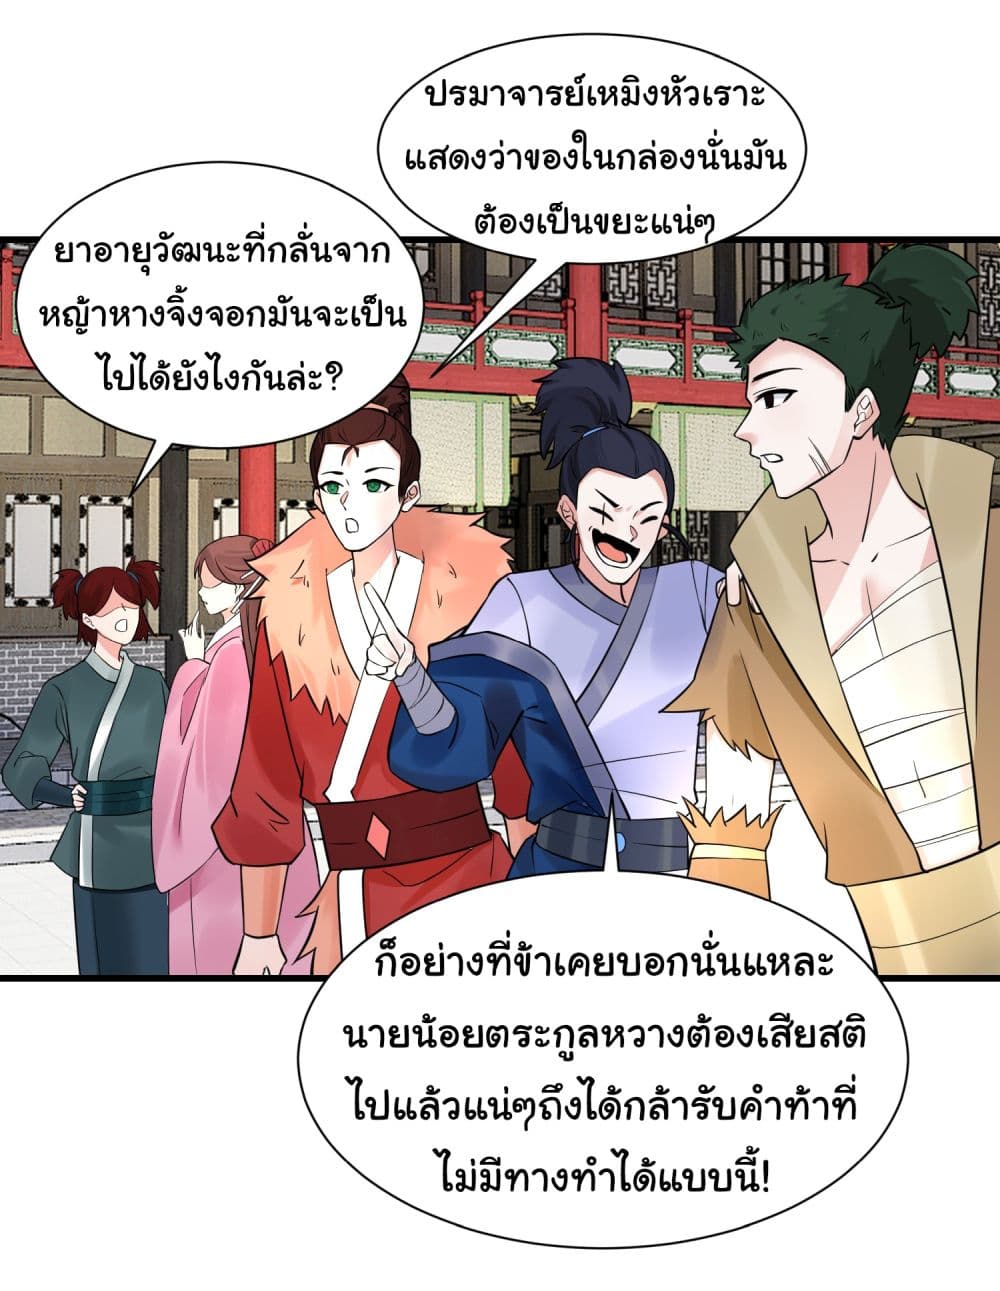 Rebirth of an Immortal Cultivator from 10,000 years ago ตอนที่ 11 (20)